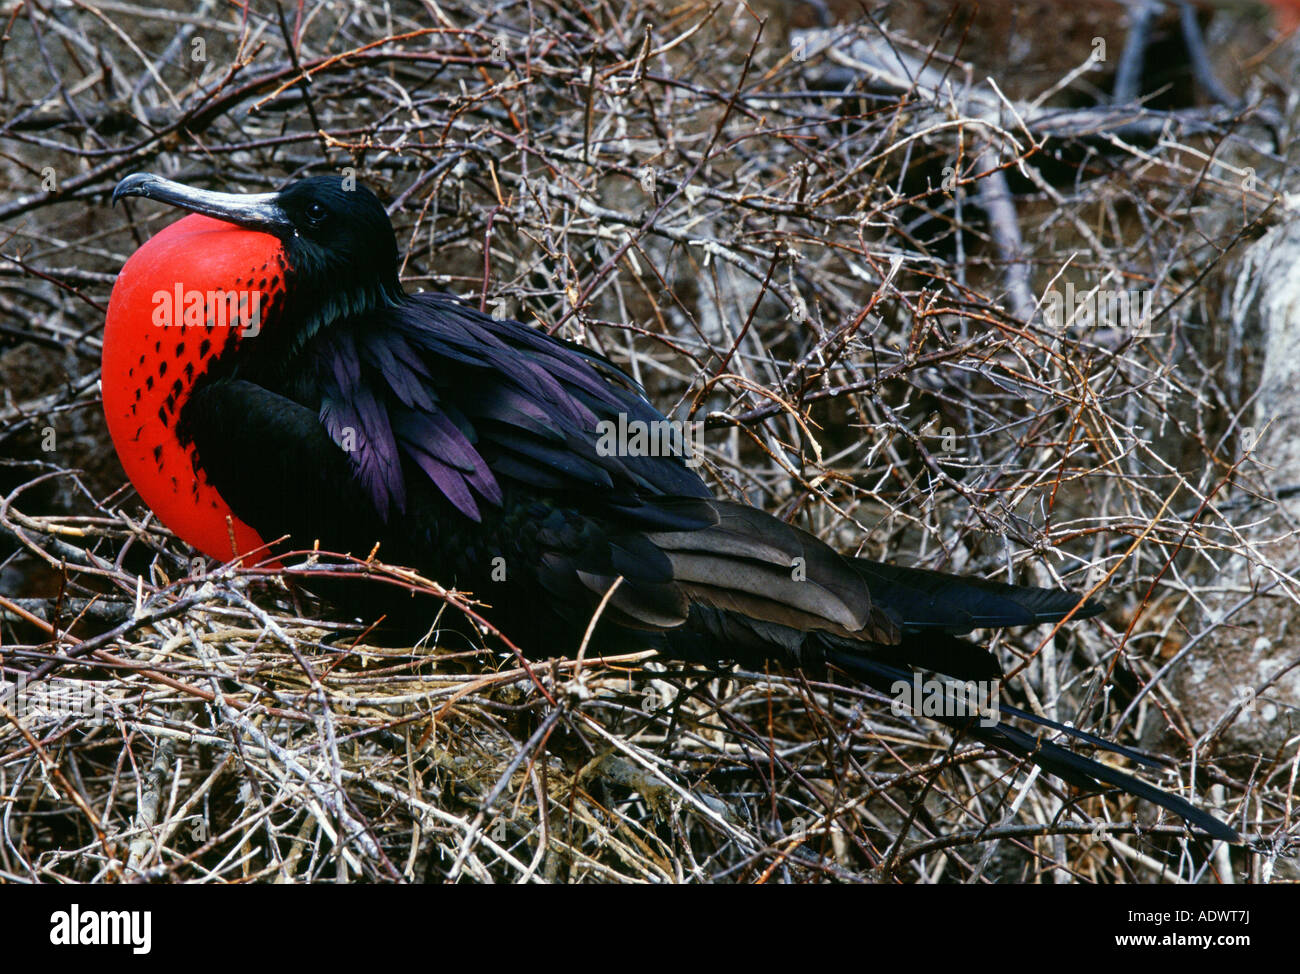 Male Frigate bird with inflated pouch Galapagos Islands Ecuador Stock Photo